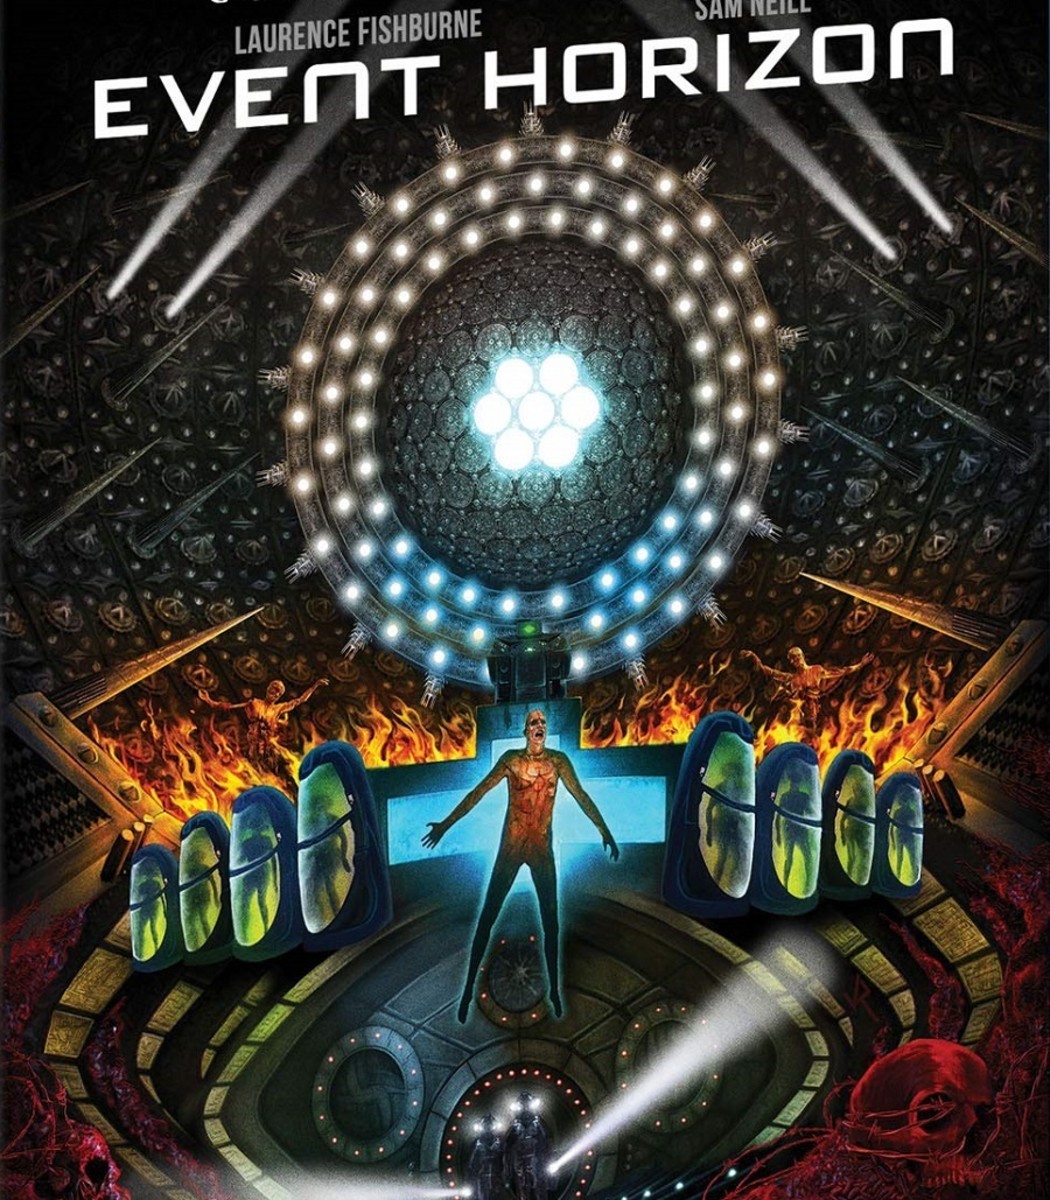 "Event Horizon"-—one of the finest space horror films of all time.